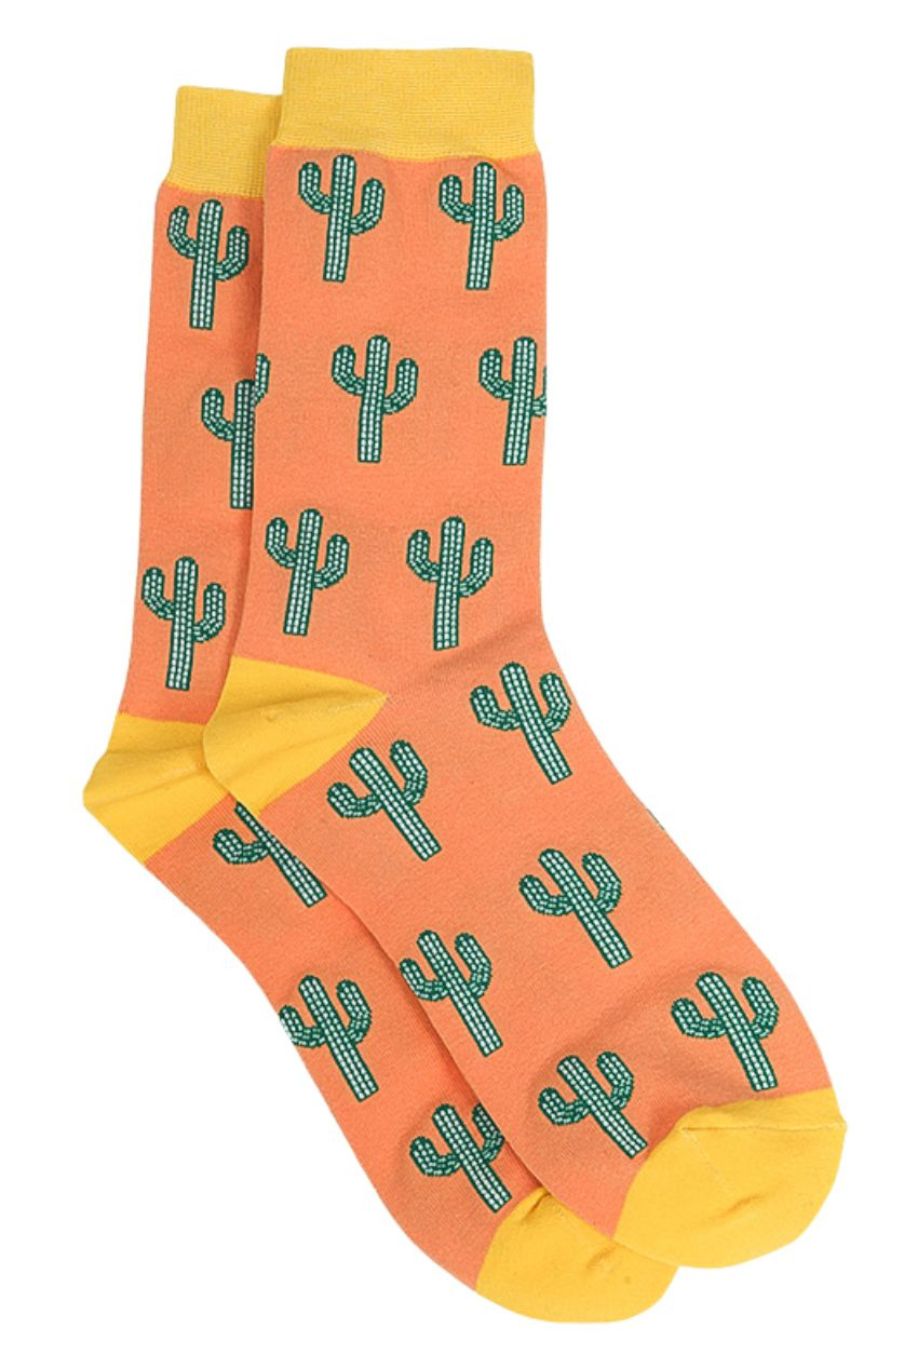 orange and yellow dress socks with green cactus all over